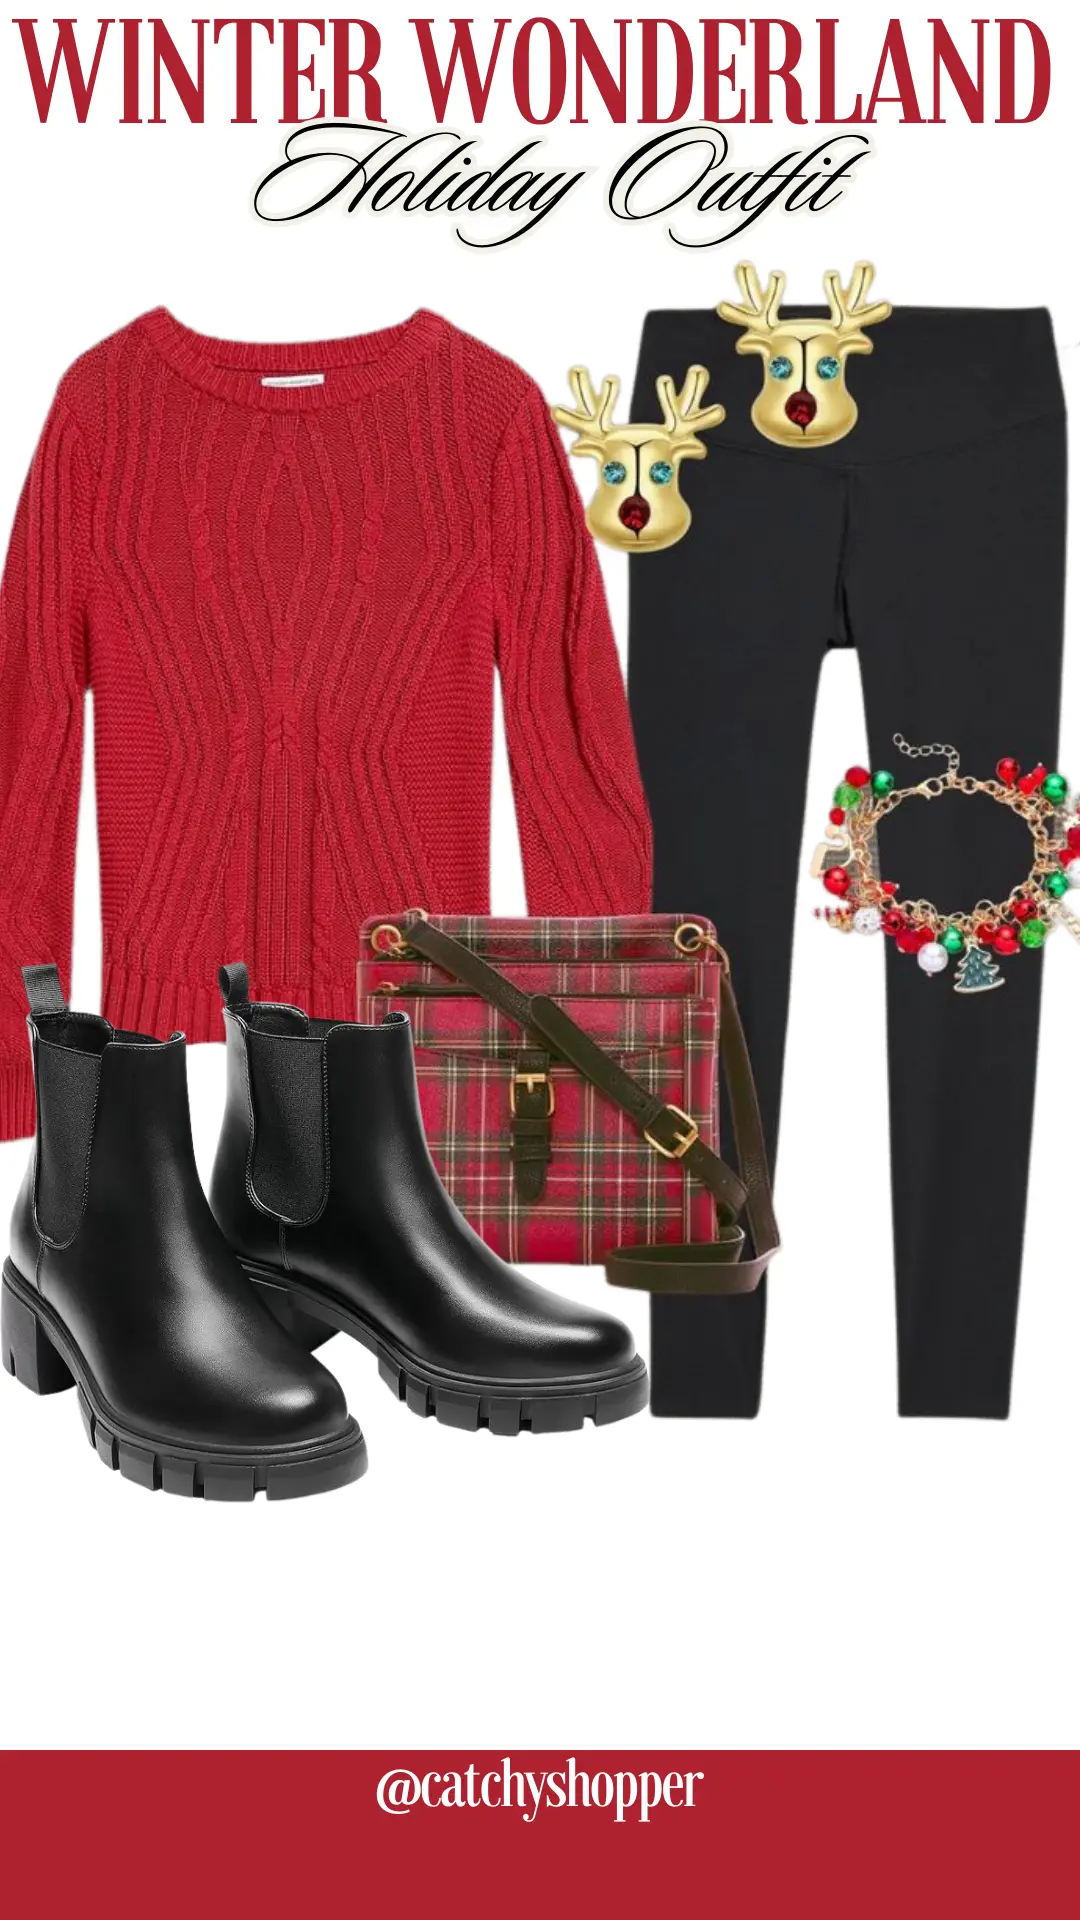 Winter Wonderland Holiday Outfit 